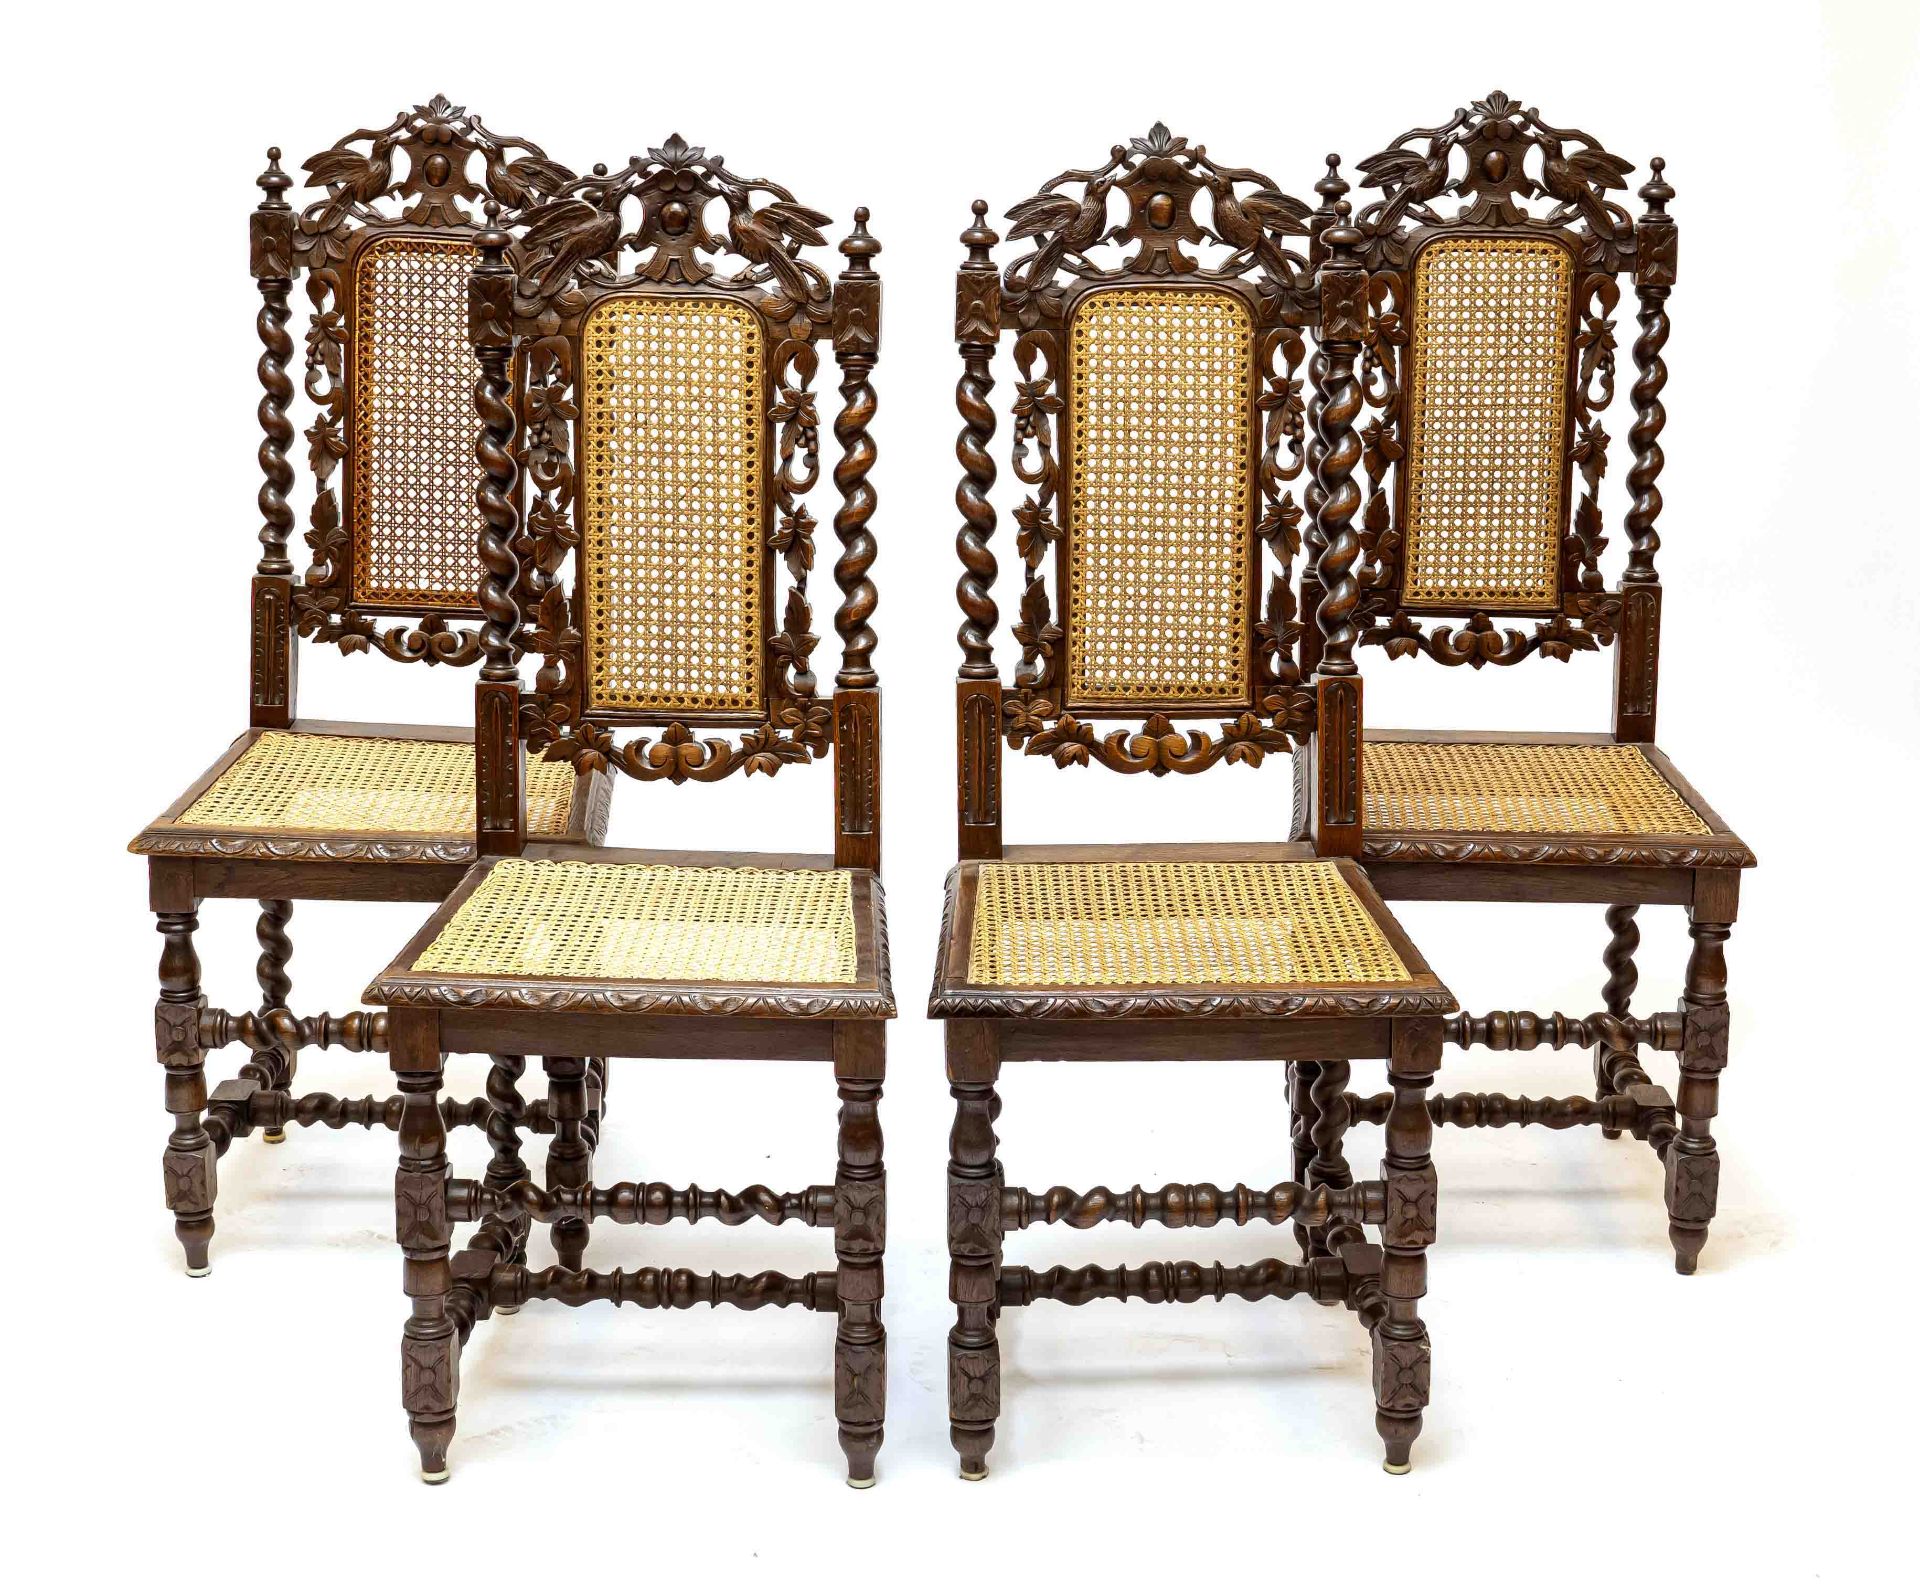 4 hunting chairs, France around 1880, oak, 113 x 45 x 45 cm - The furniture cannot be viewed in